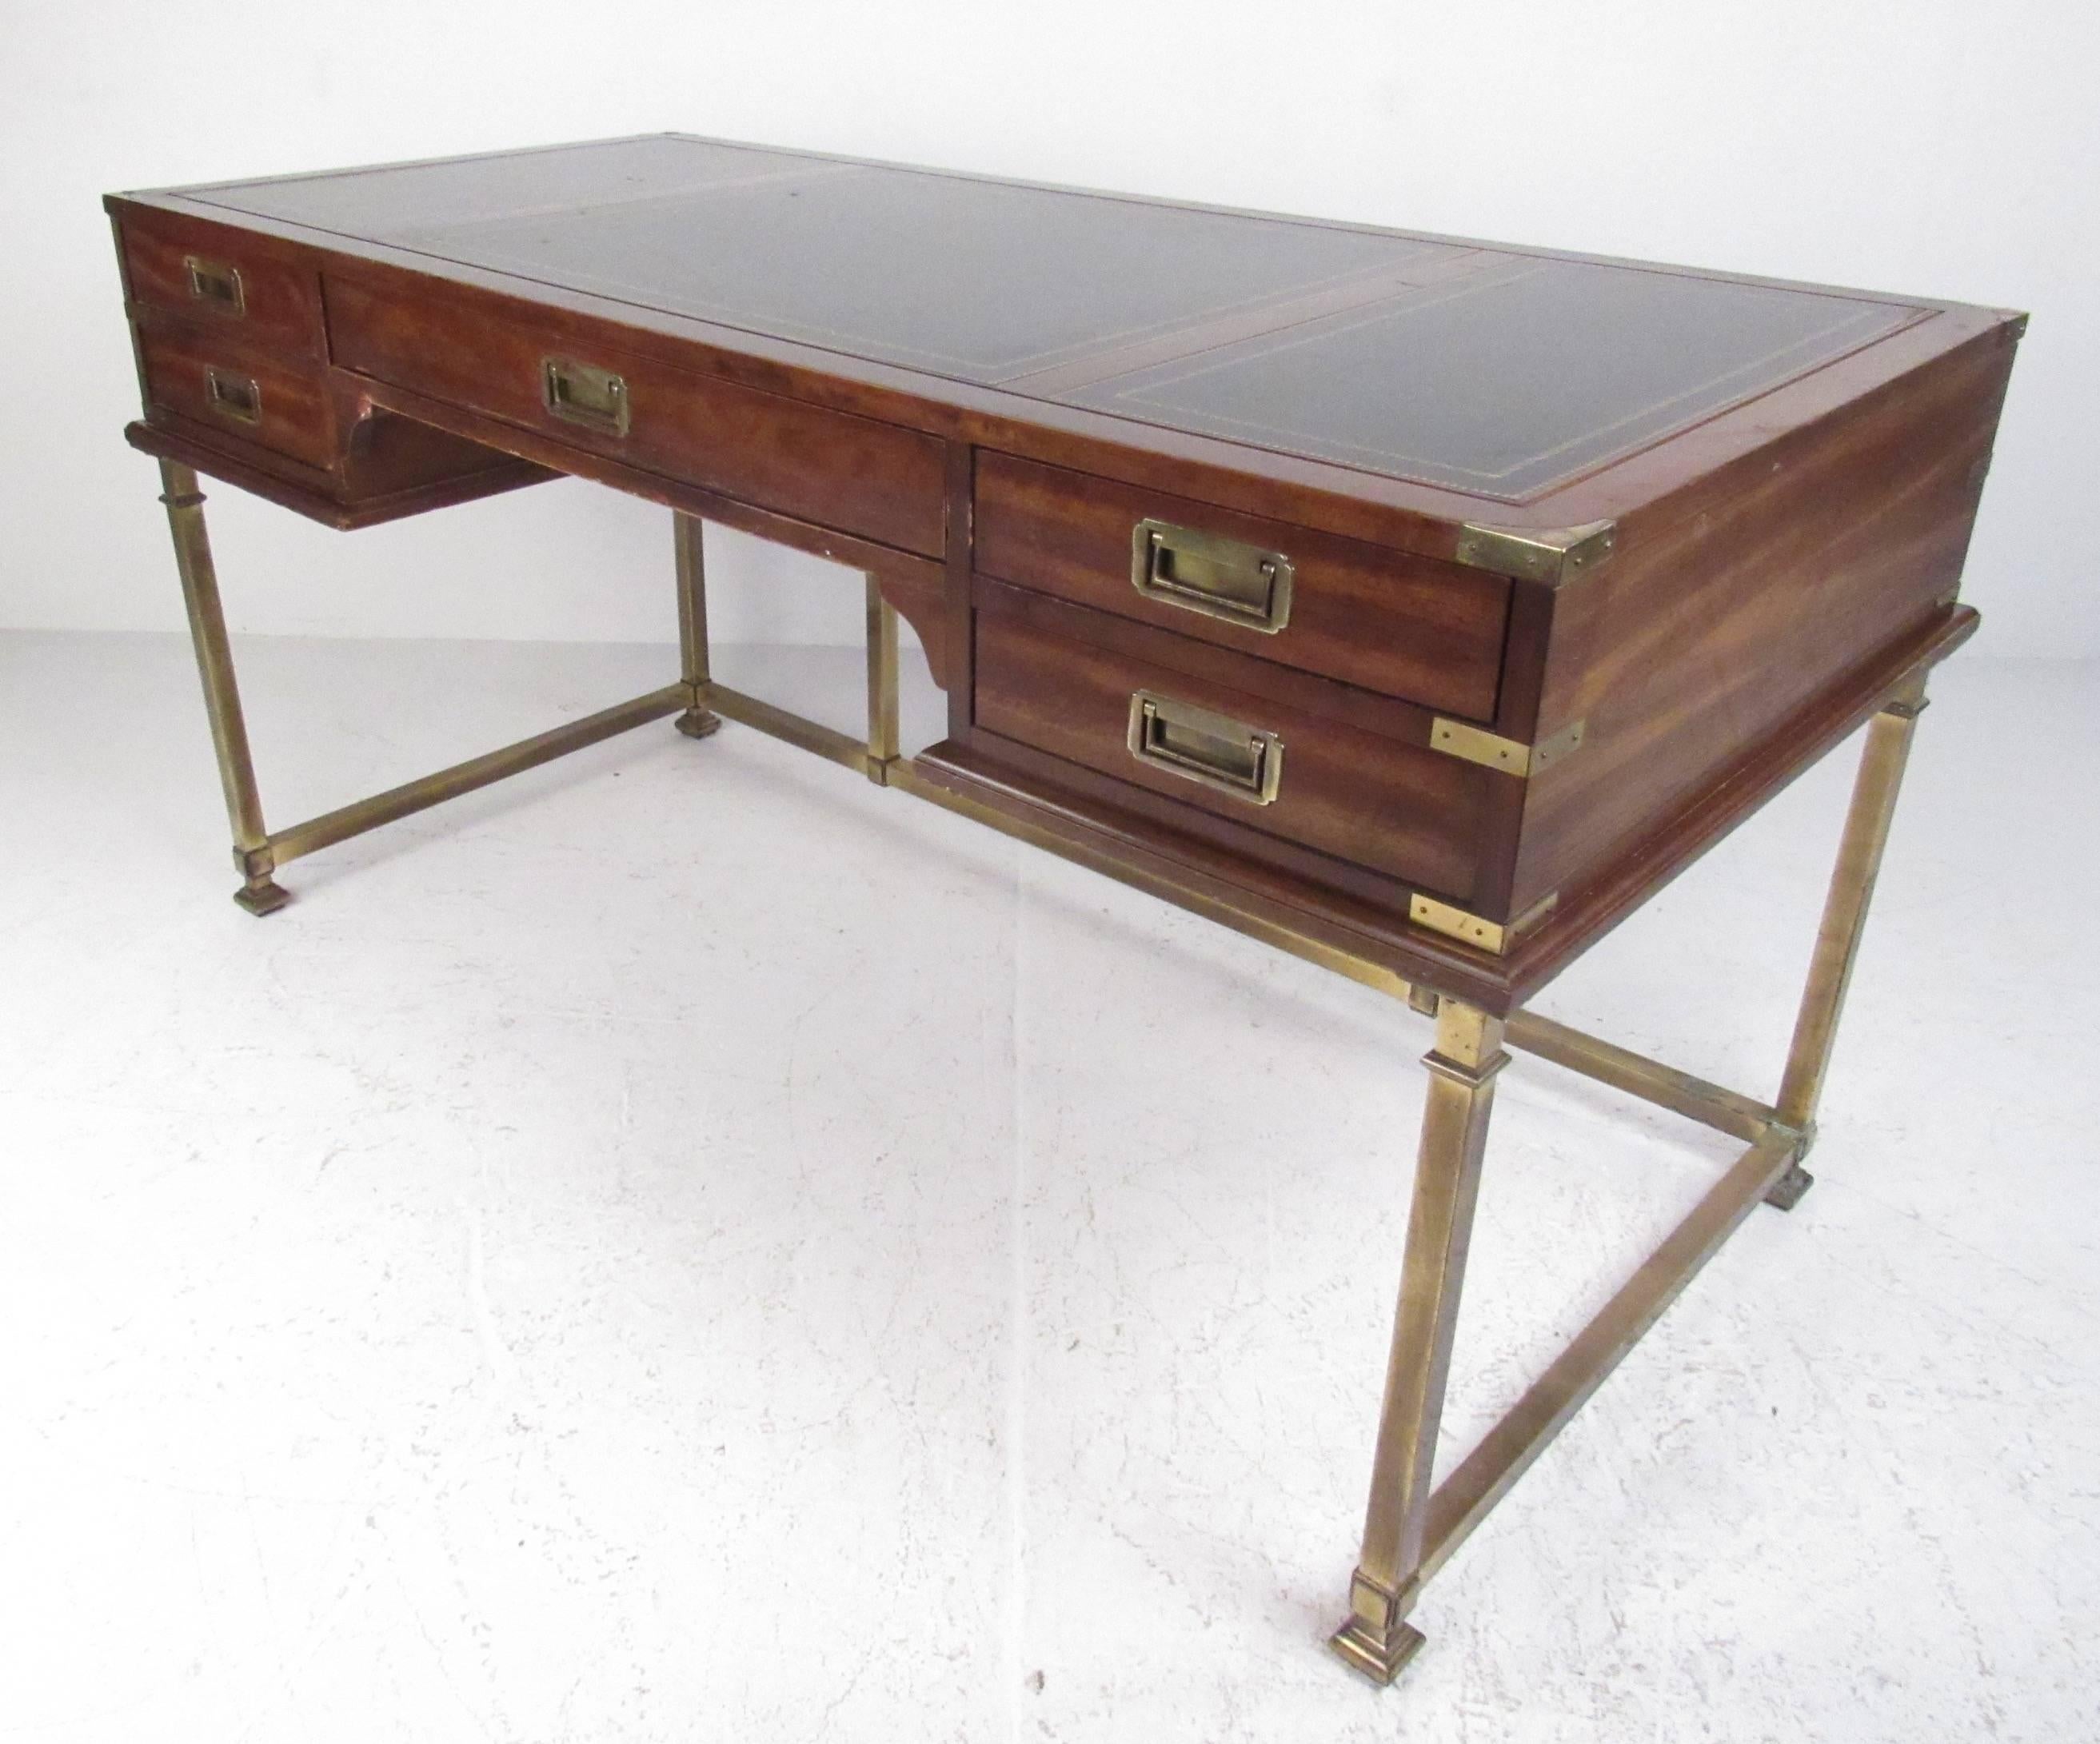 Mid-Century Modern campaign desk by Sligh Furniture company of Holland, Mich. Made of mahogany with leather top and brass base, it has five drawers and is finished on all sides. Please confirm item location (NY or NJ) with dealer.